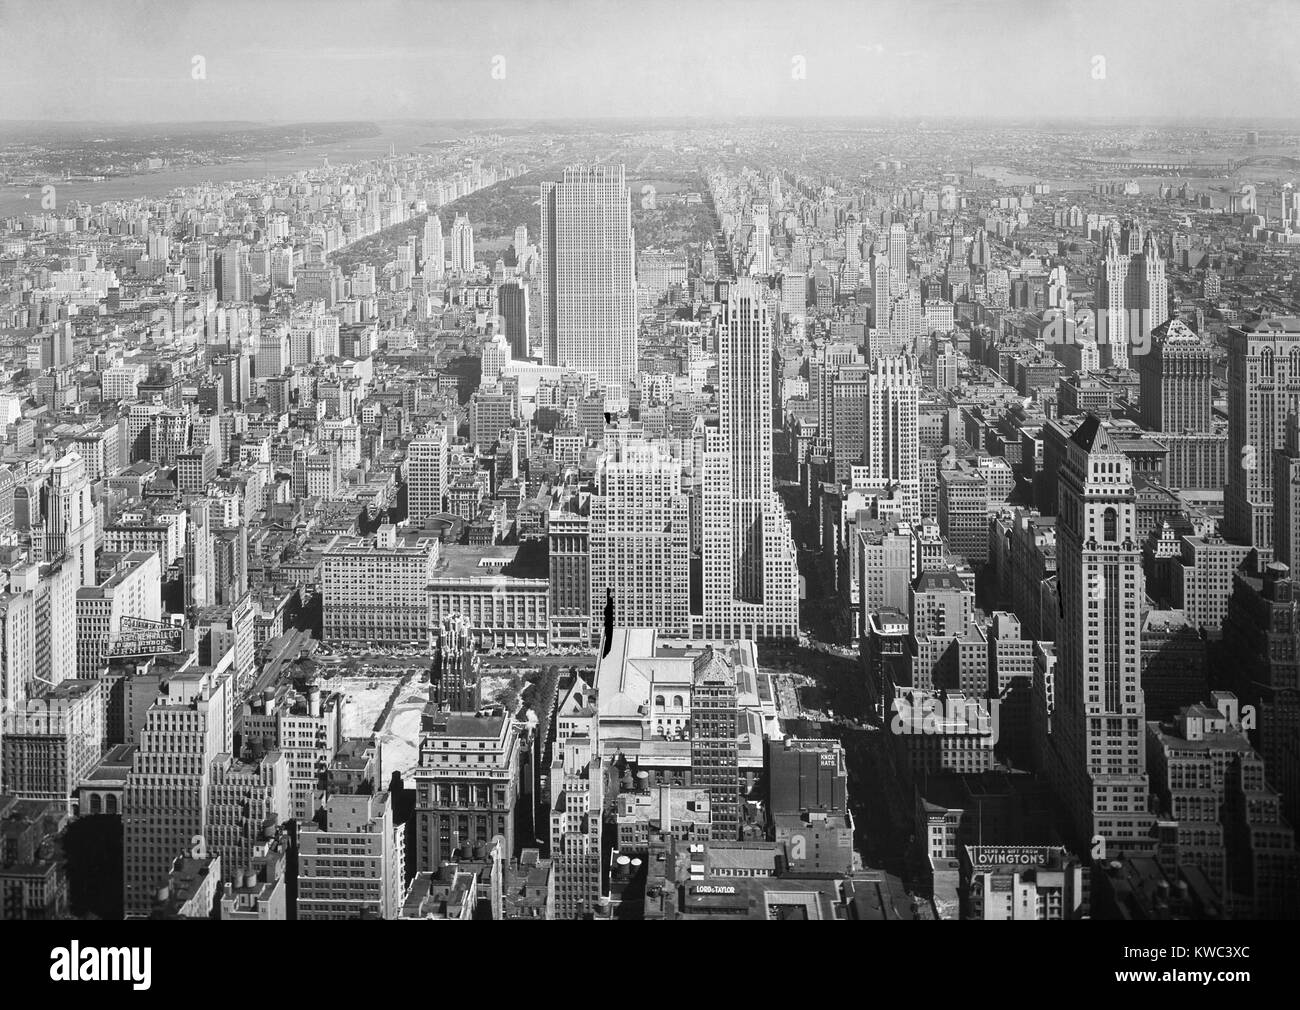 View North from NYC's Empire State Building includes the new RCA Building. Sept 11, 1933. Beyond are the Upper West and East Sides, bordering Central Park. Photo by Samuel H. Gottscho. (BSLOC 2015 14 204) Stock Photo